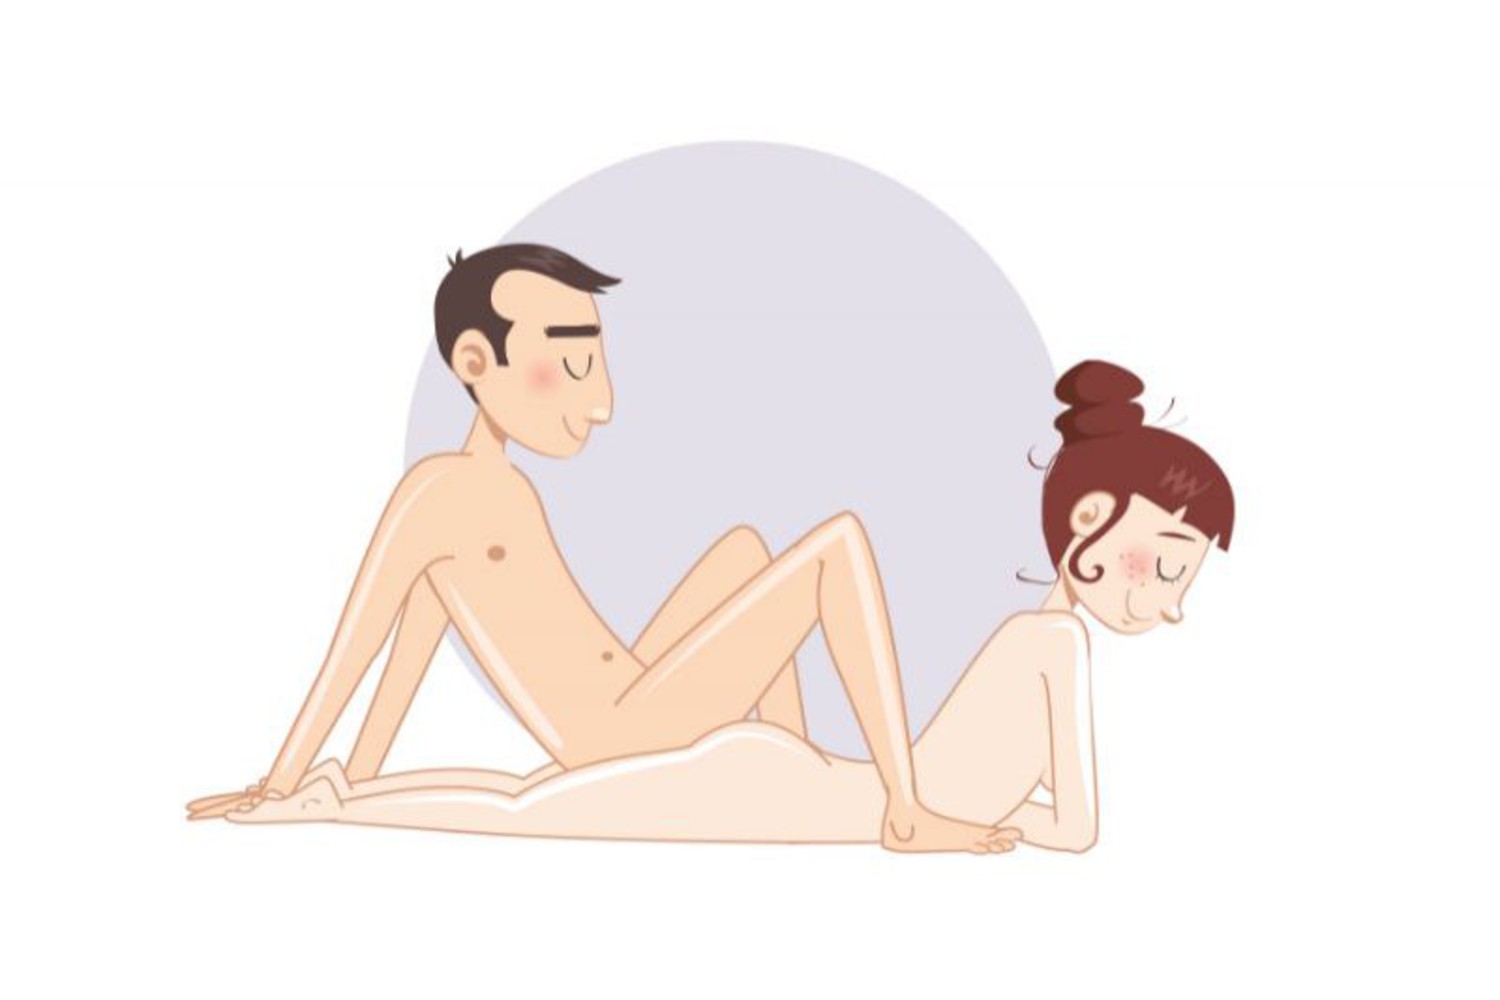 An Illustration Of The Ear Muffs Sex Position.